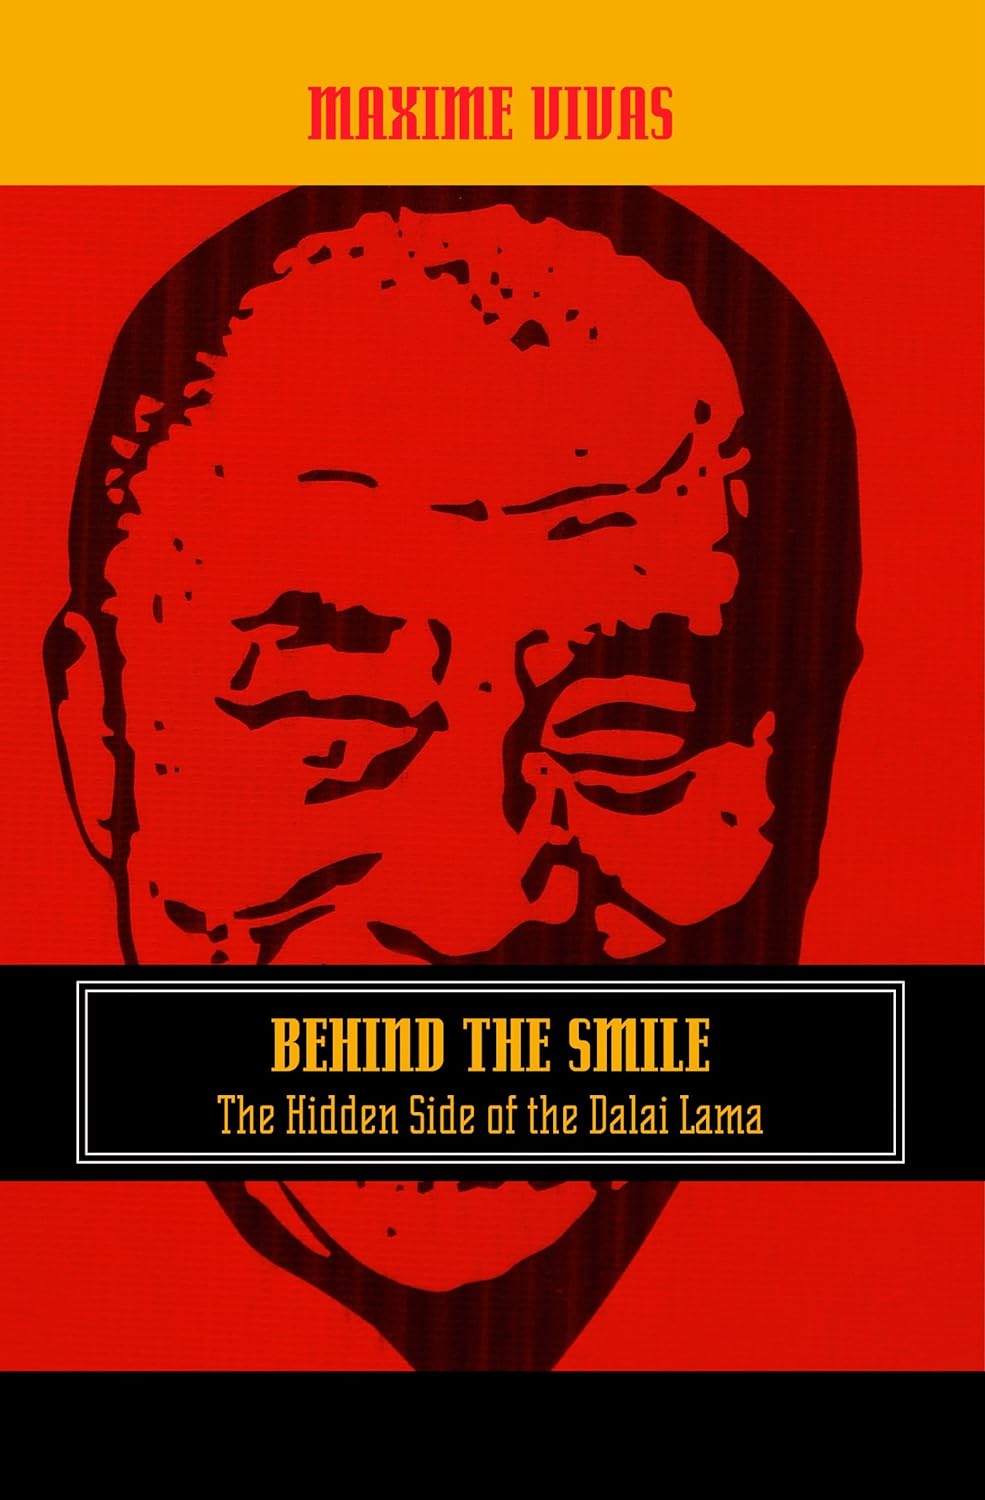 Behind the Smile: The Hidden Side of the Dalai Lama